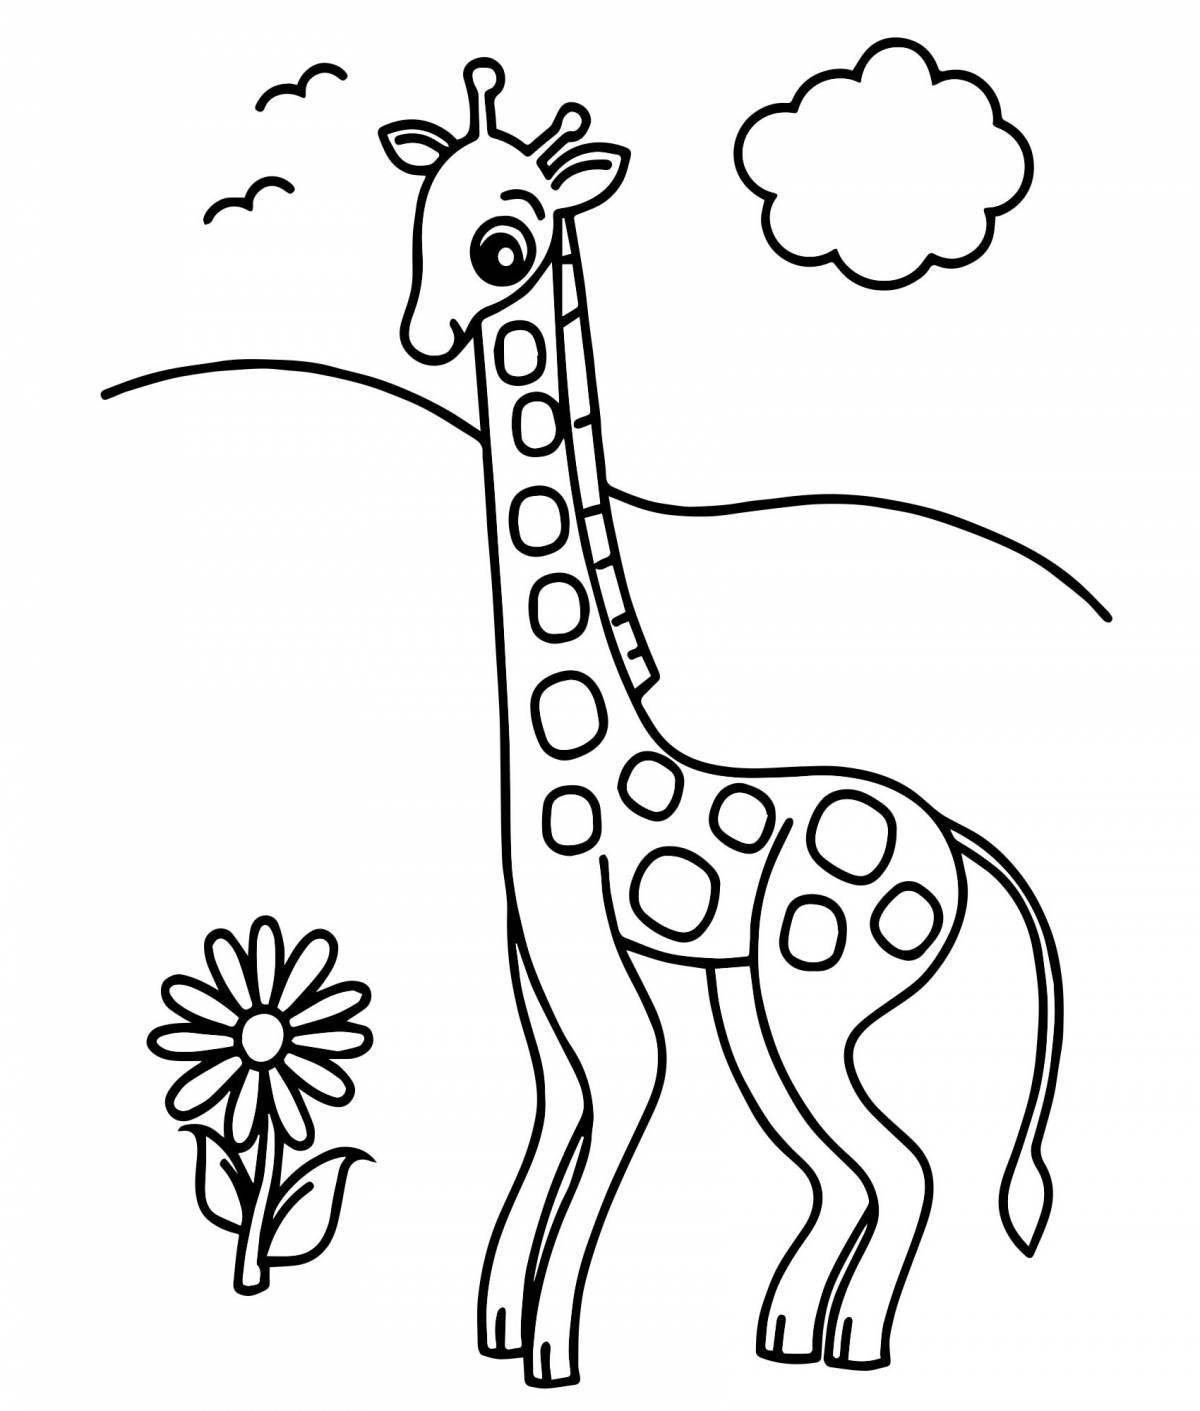 Amazing giraffe coloring book for 3-4 year olds